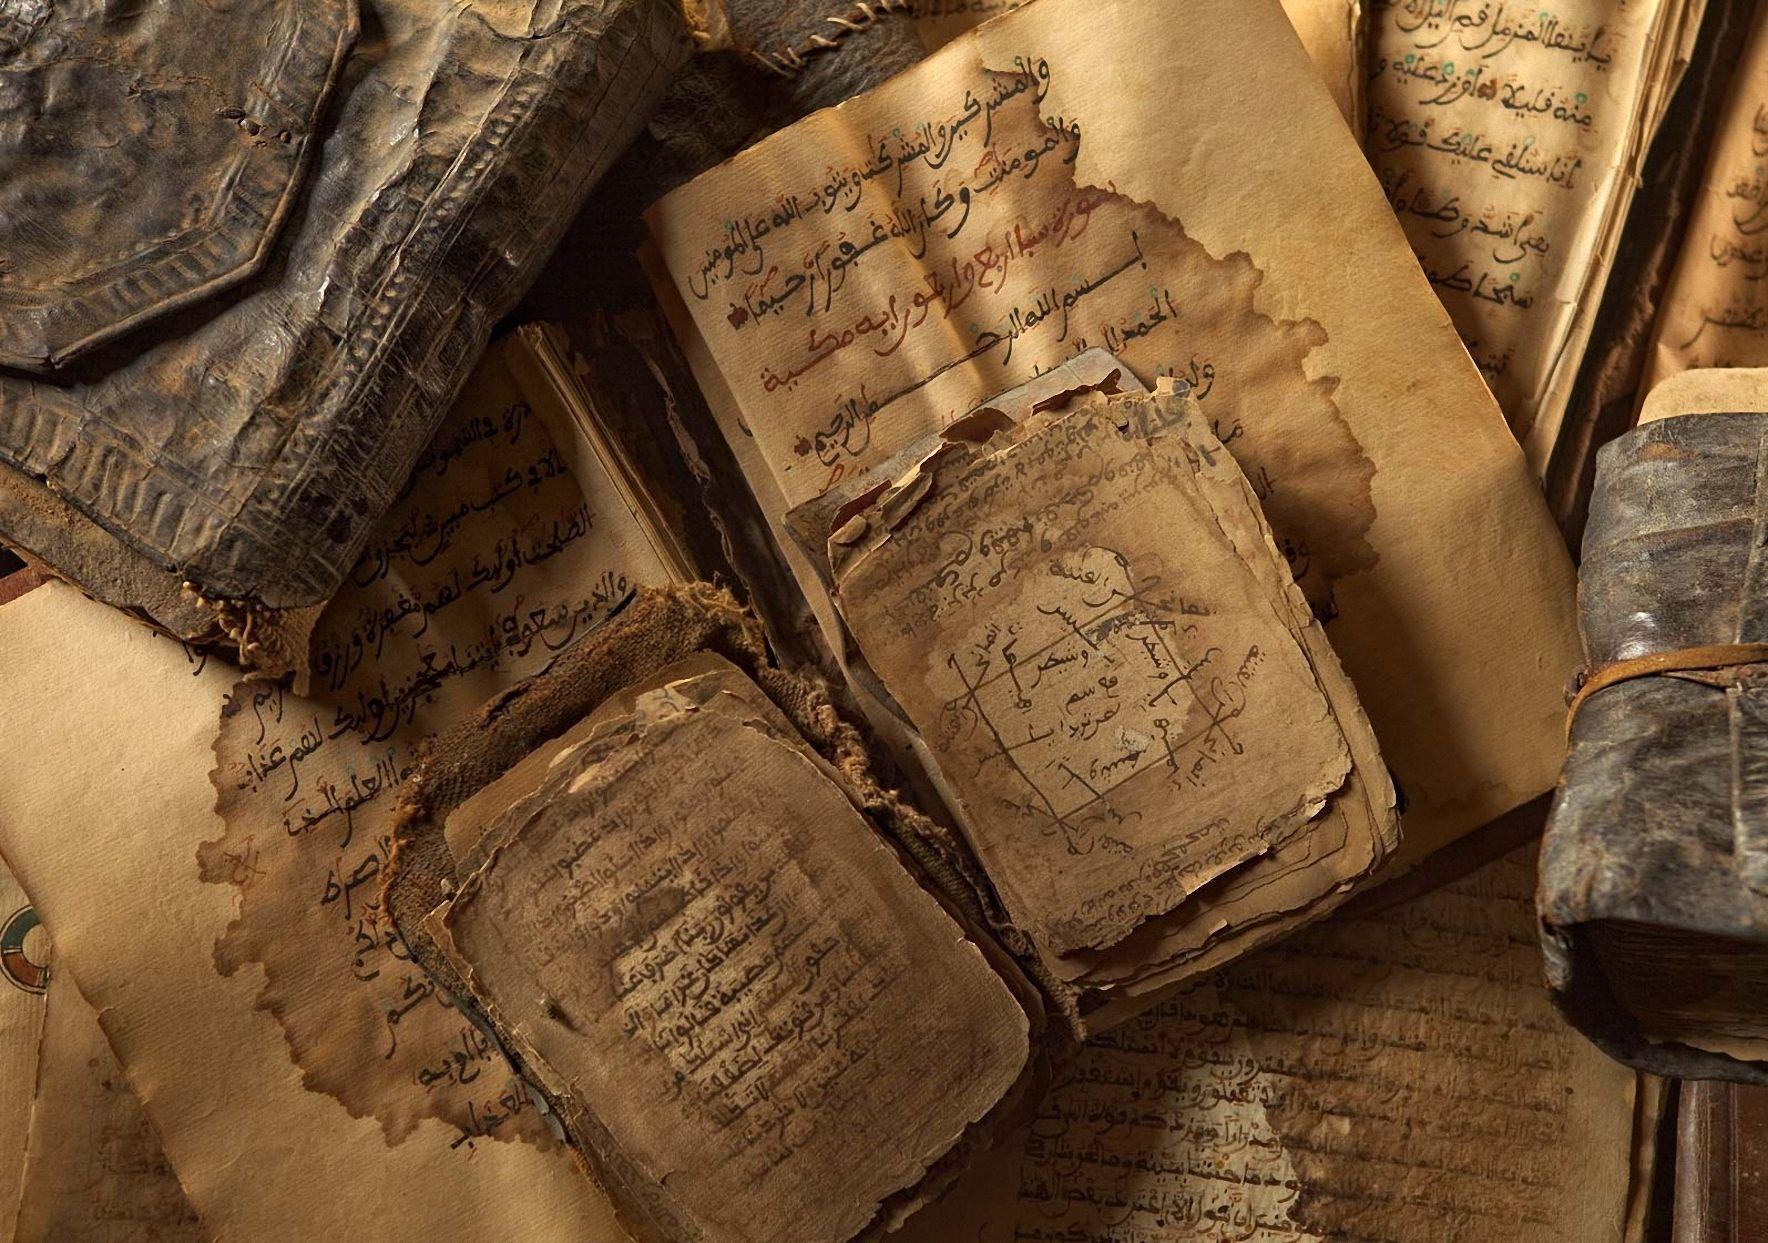 old arabic books HD Backgrounds Wallpapers